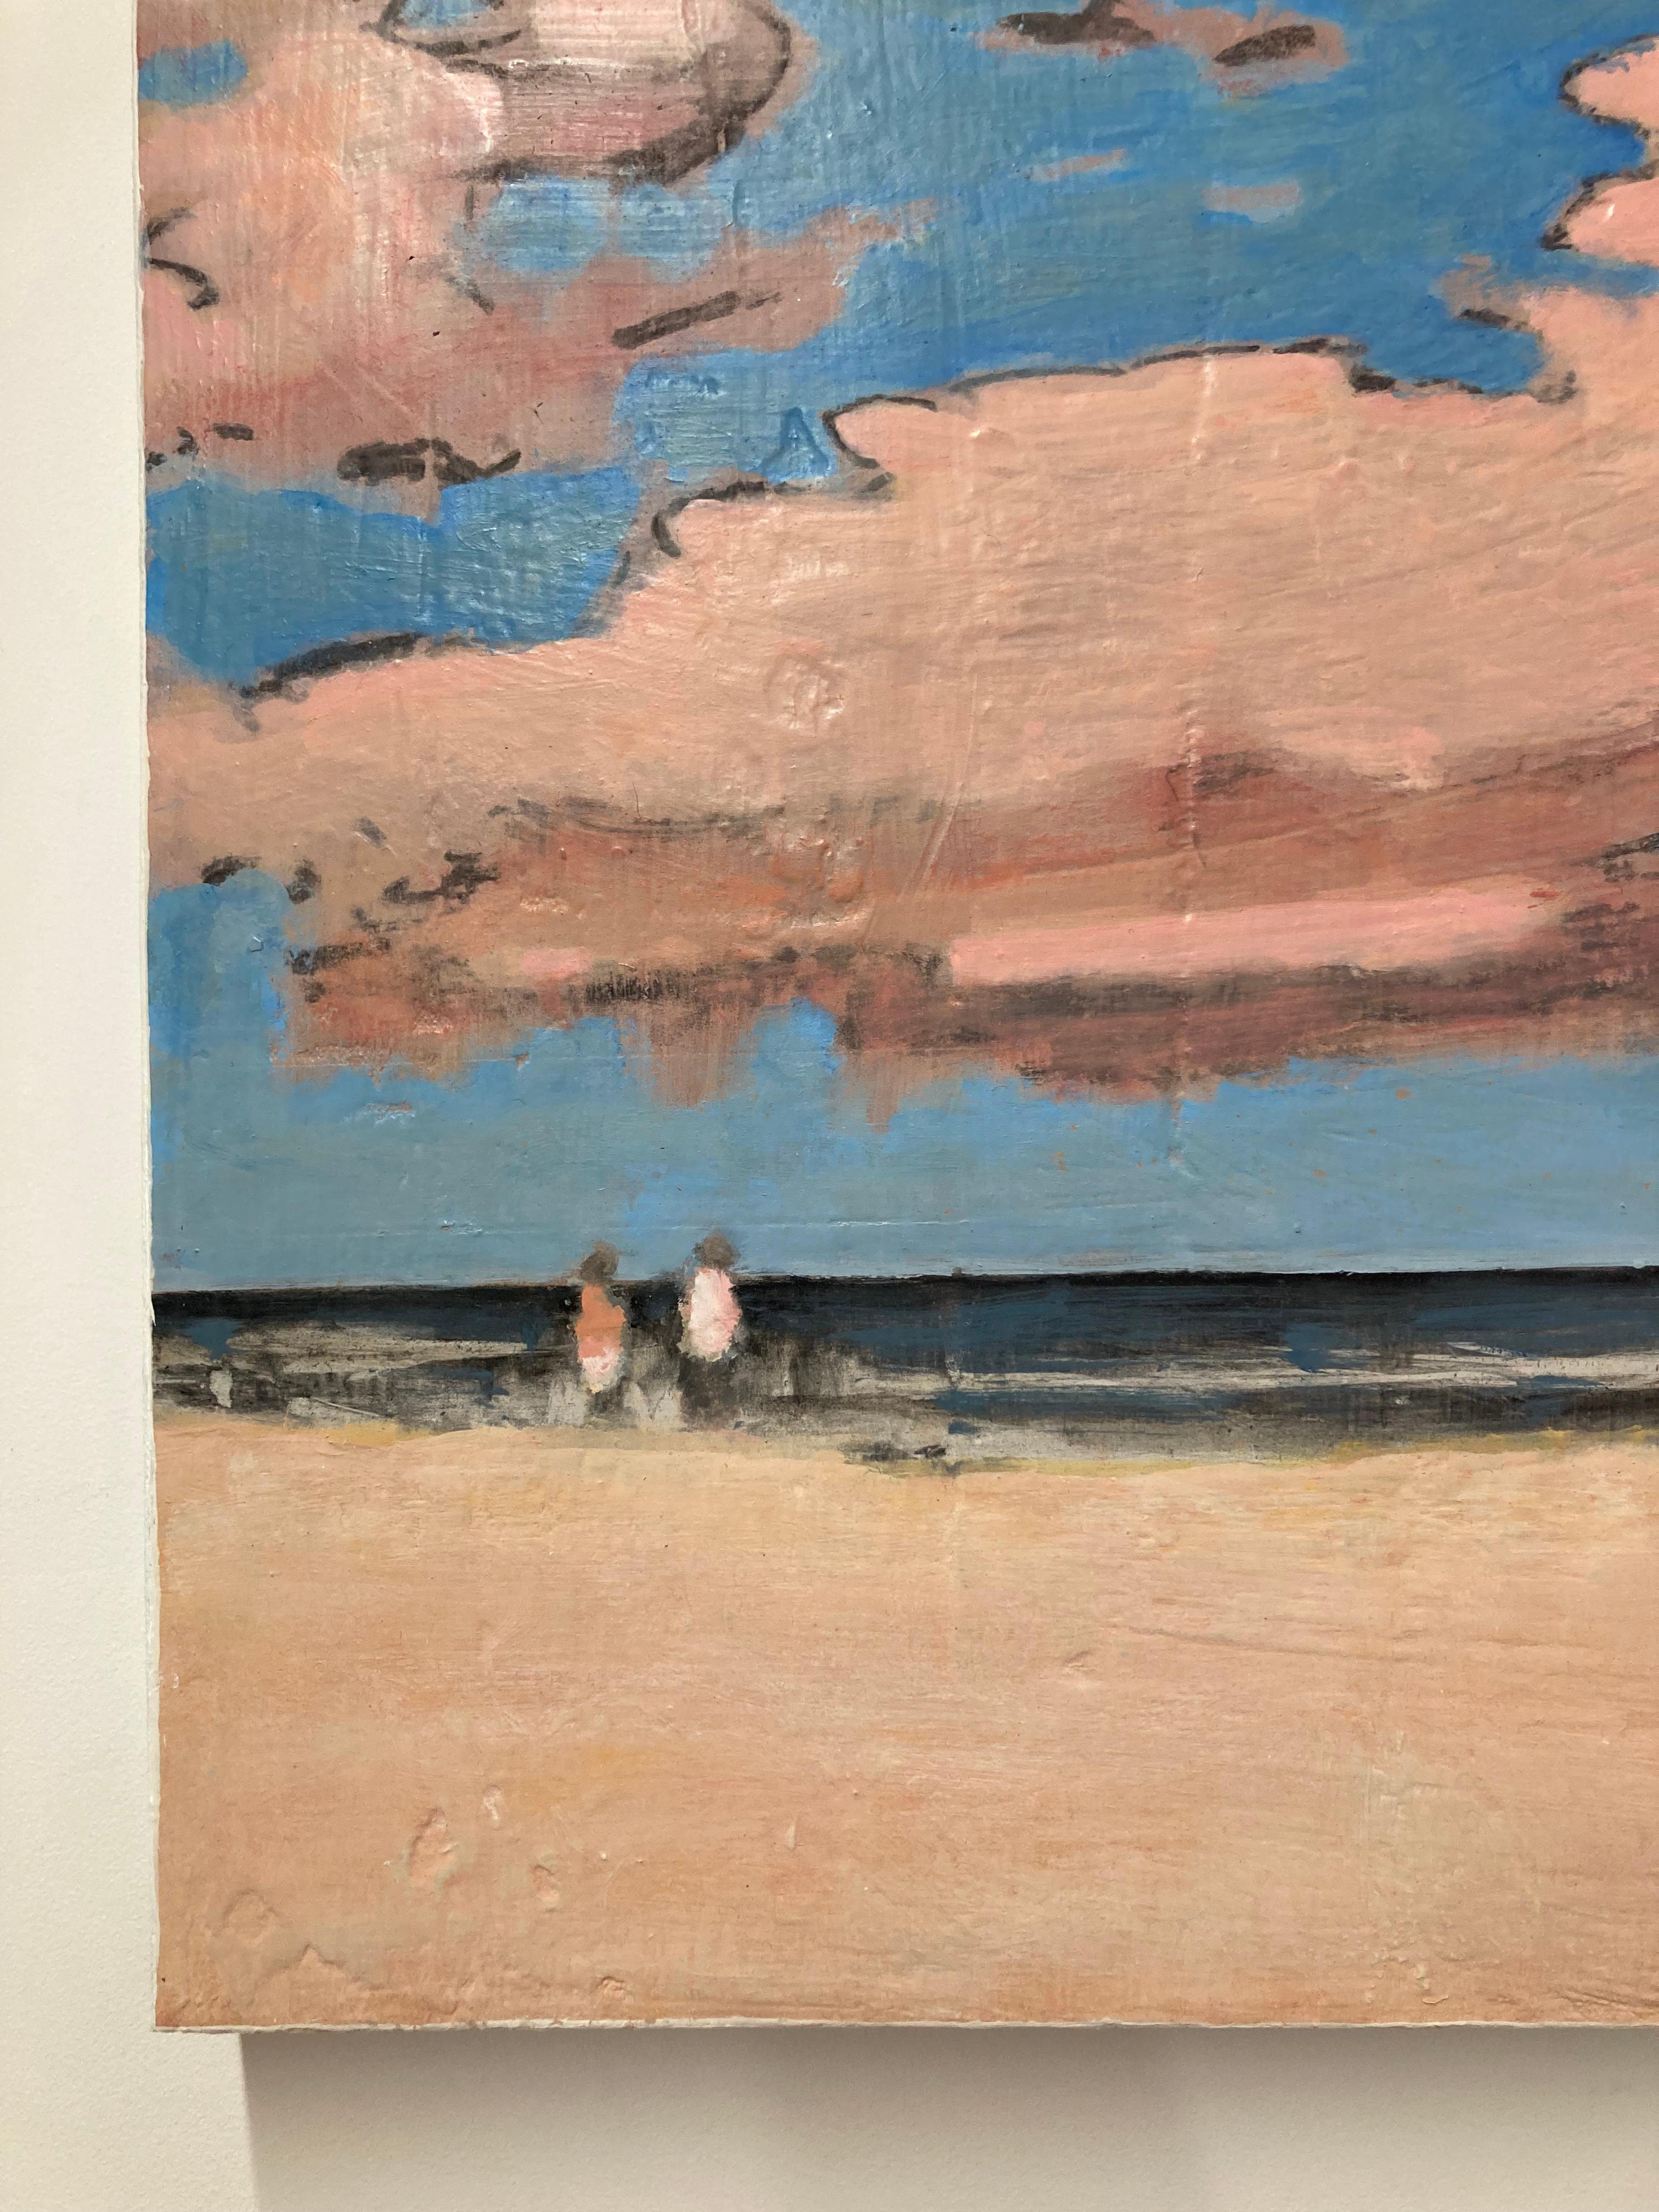 Two figures stand by the shore of a beach, appearing to gaze out at the deep blue ocean, while fluffy, pale salmon pink cumulus clouds float in the idyllic blue sky overhead. Signed, dated and titled on verso.

David Konigsberg applies many layers